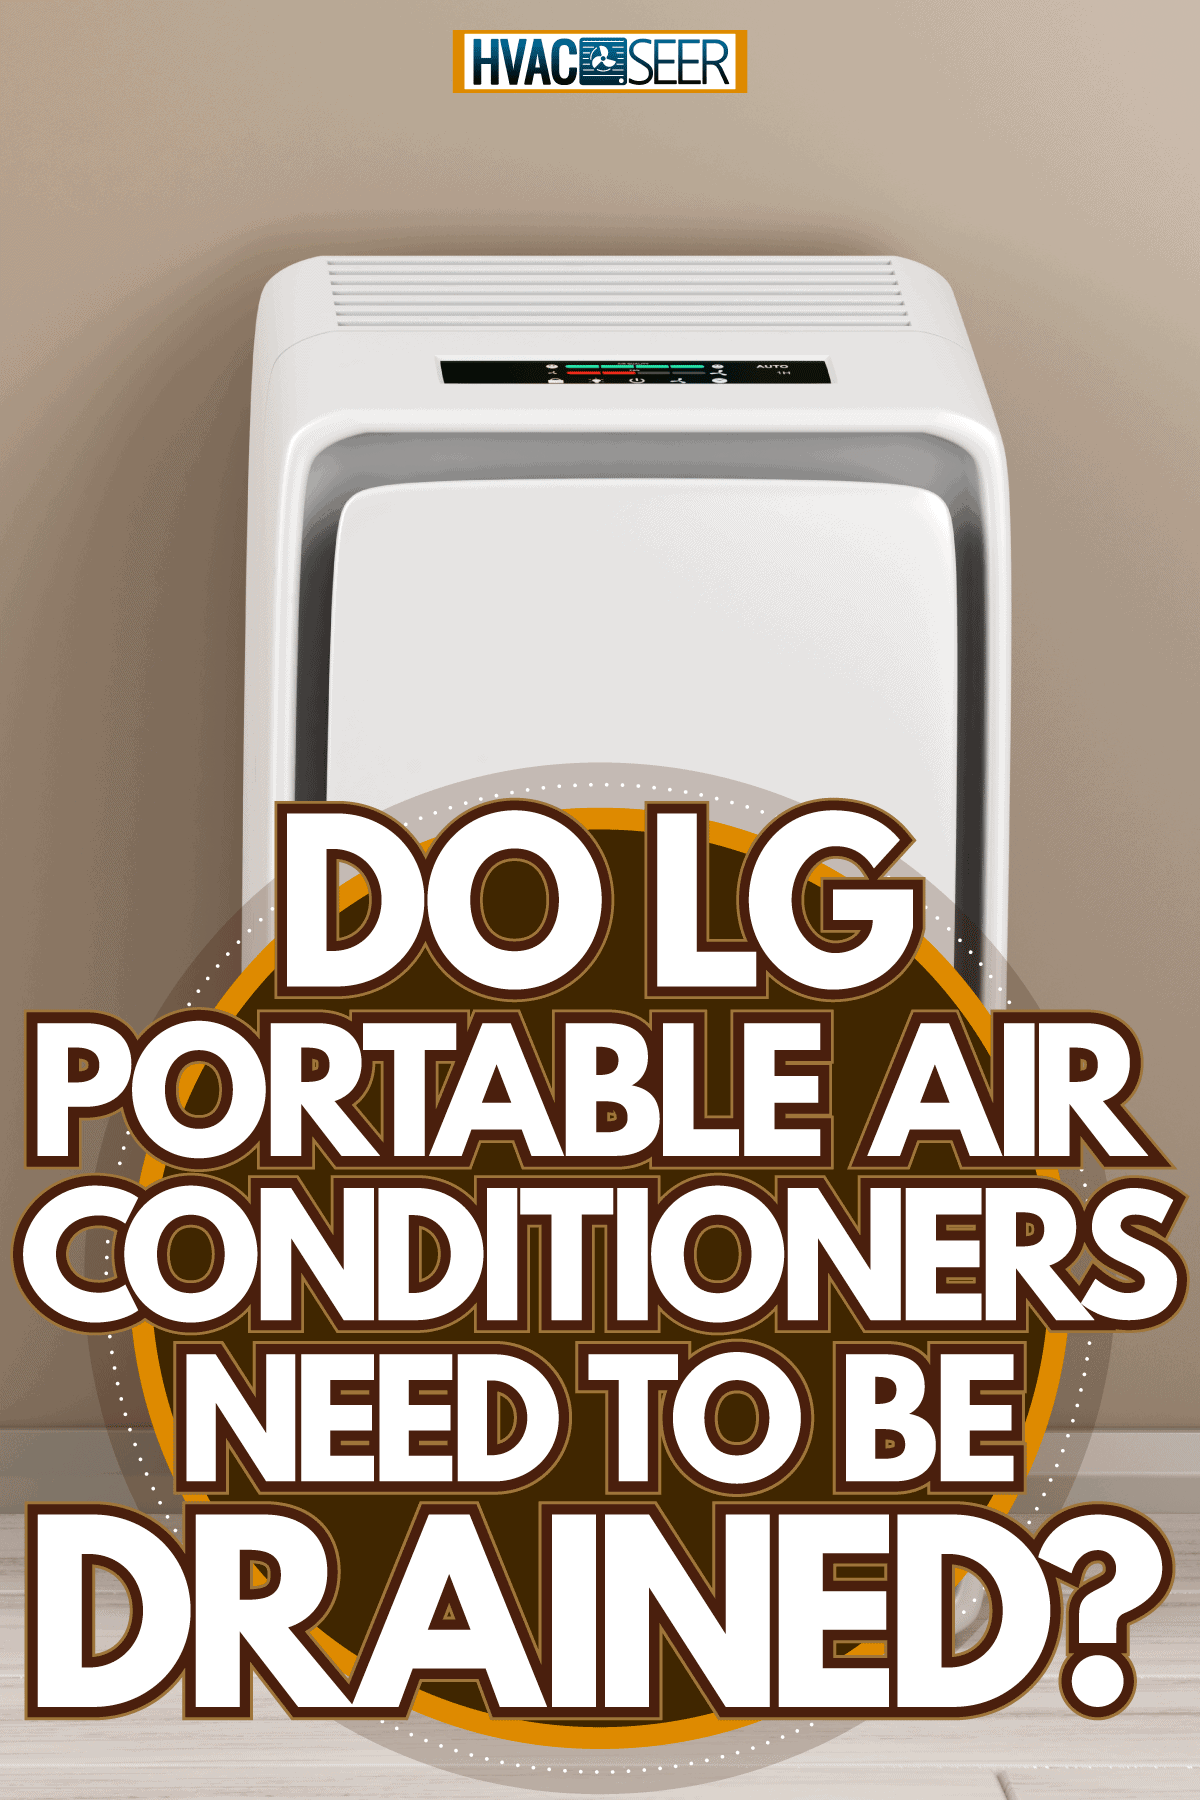 A portable air conditioning unit on the side of a room, Do LG Portable Air Conditioners Need To Be Drained